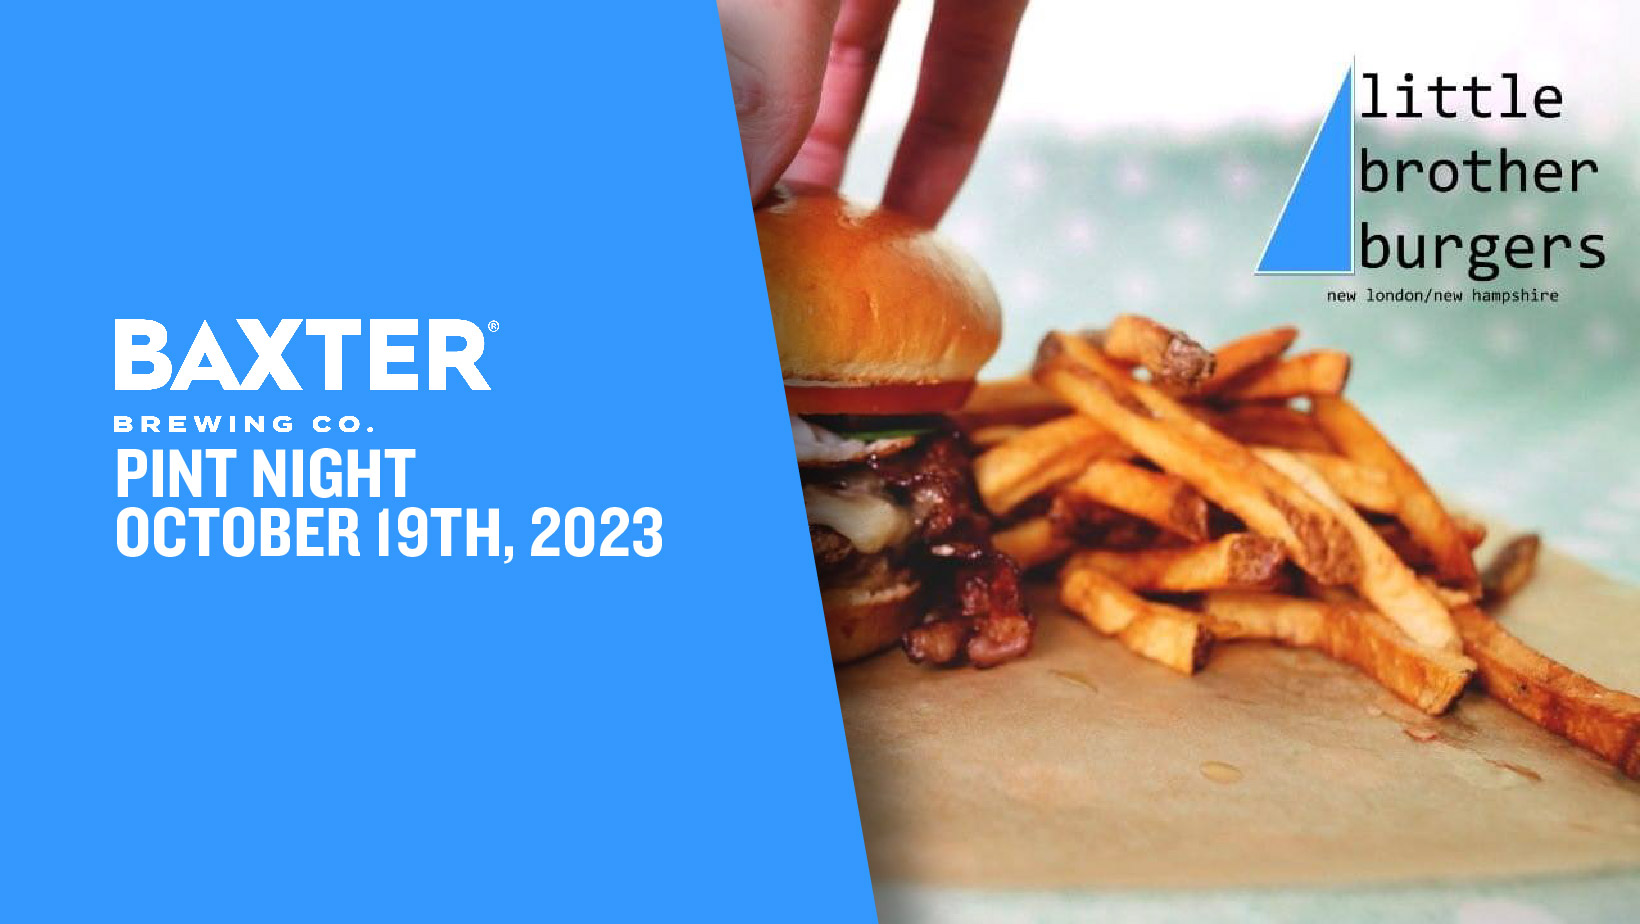 image promoting a pint night at Little Brothers Burgers on October 19th